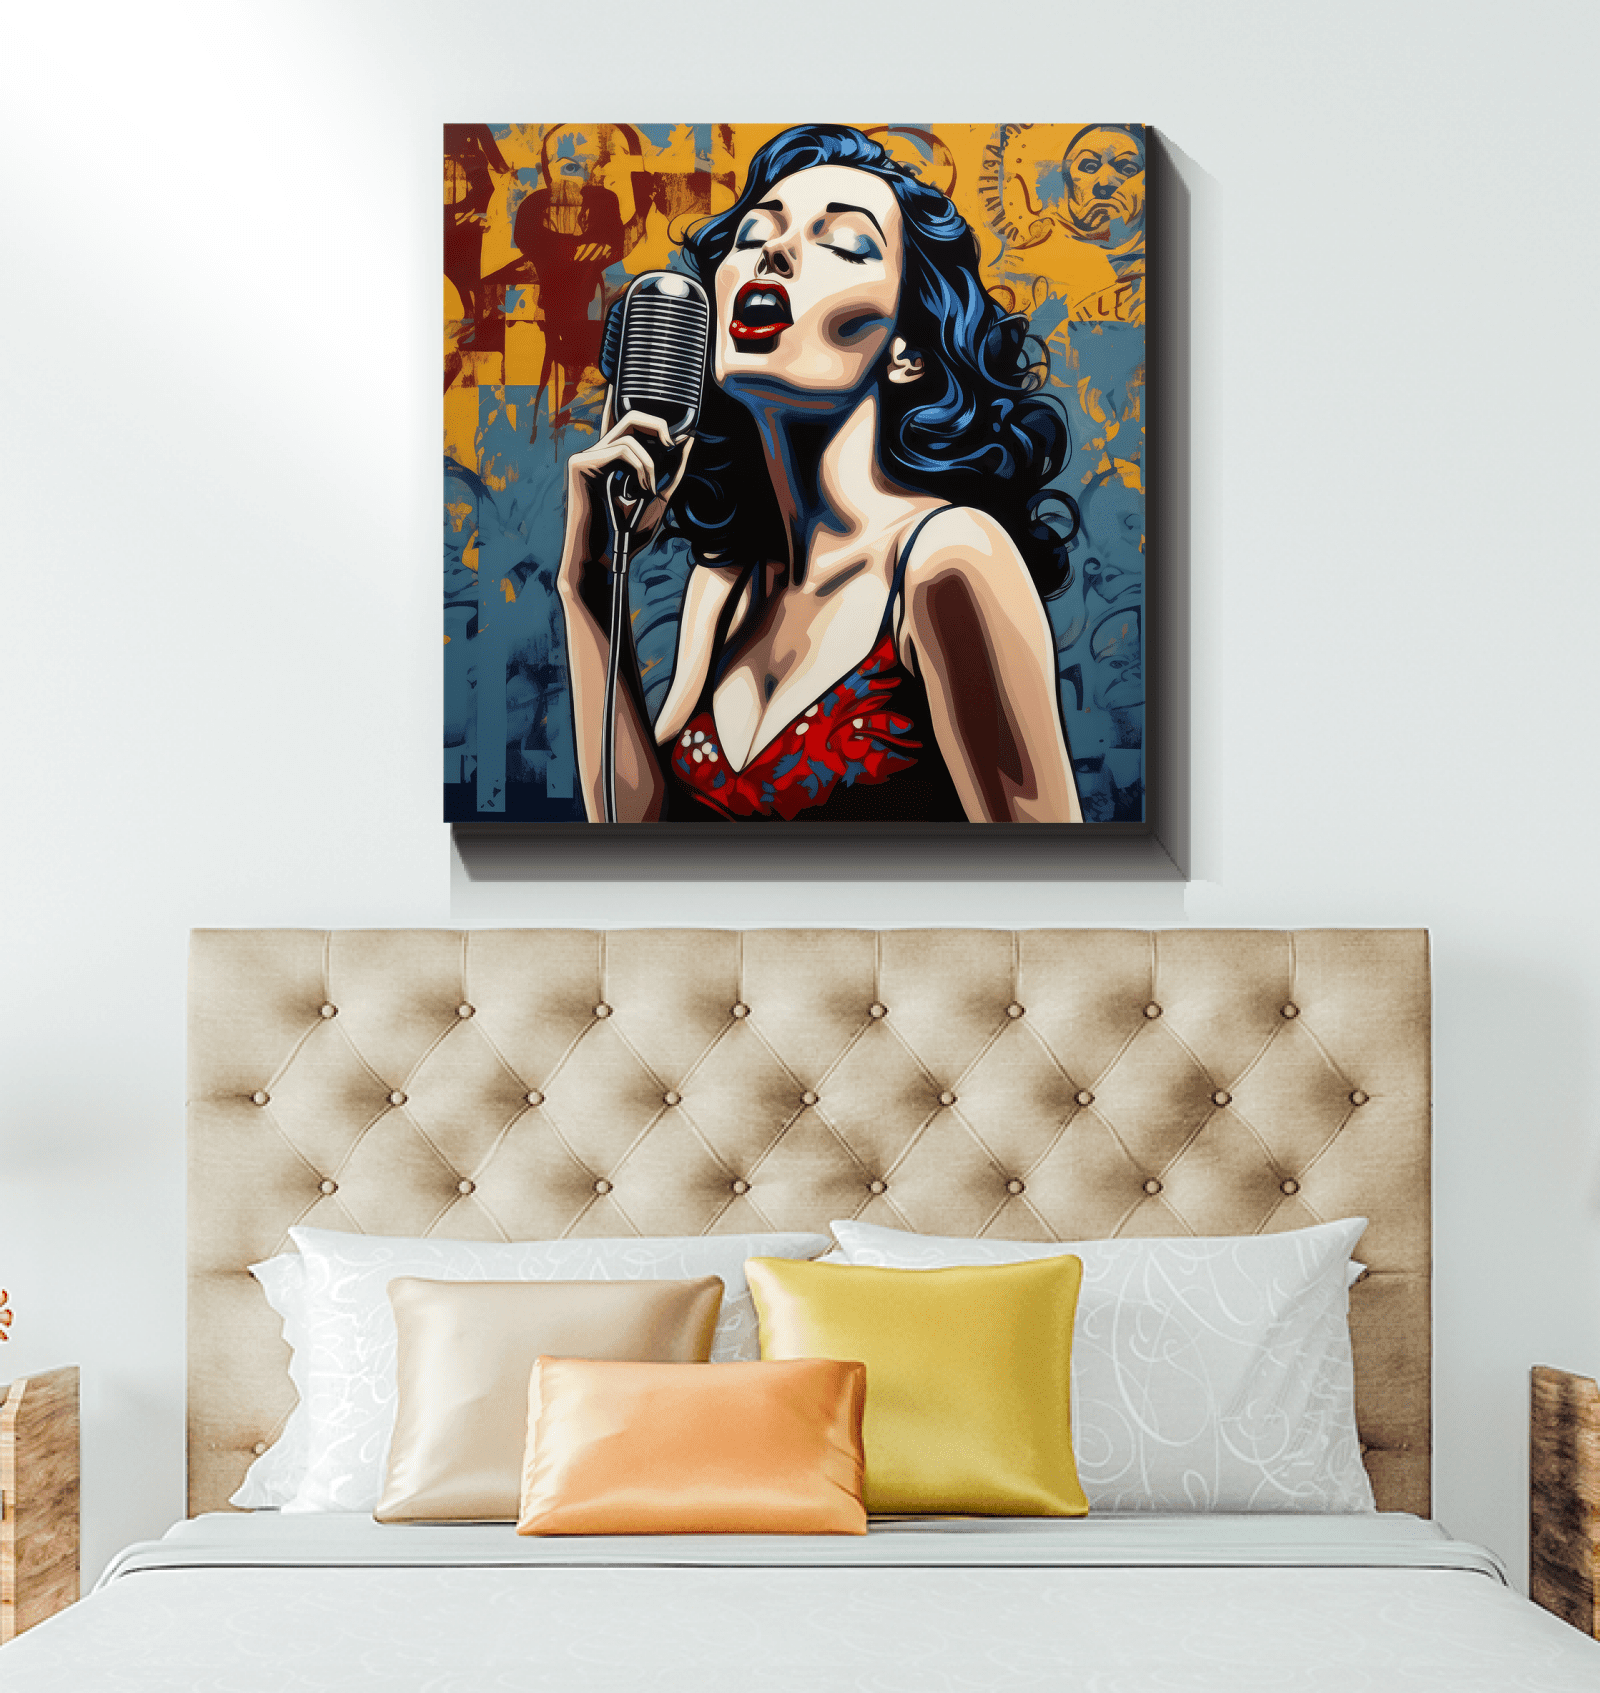 Stylish home decor with Music Speaks Truth art canvas.